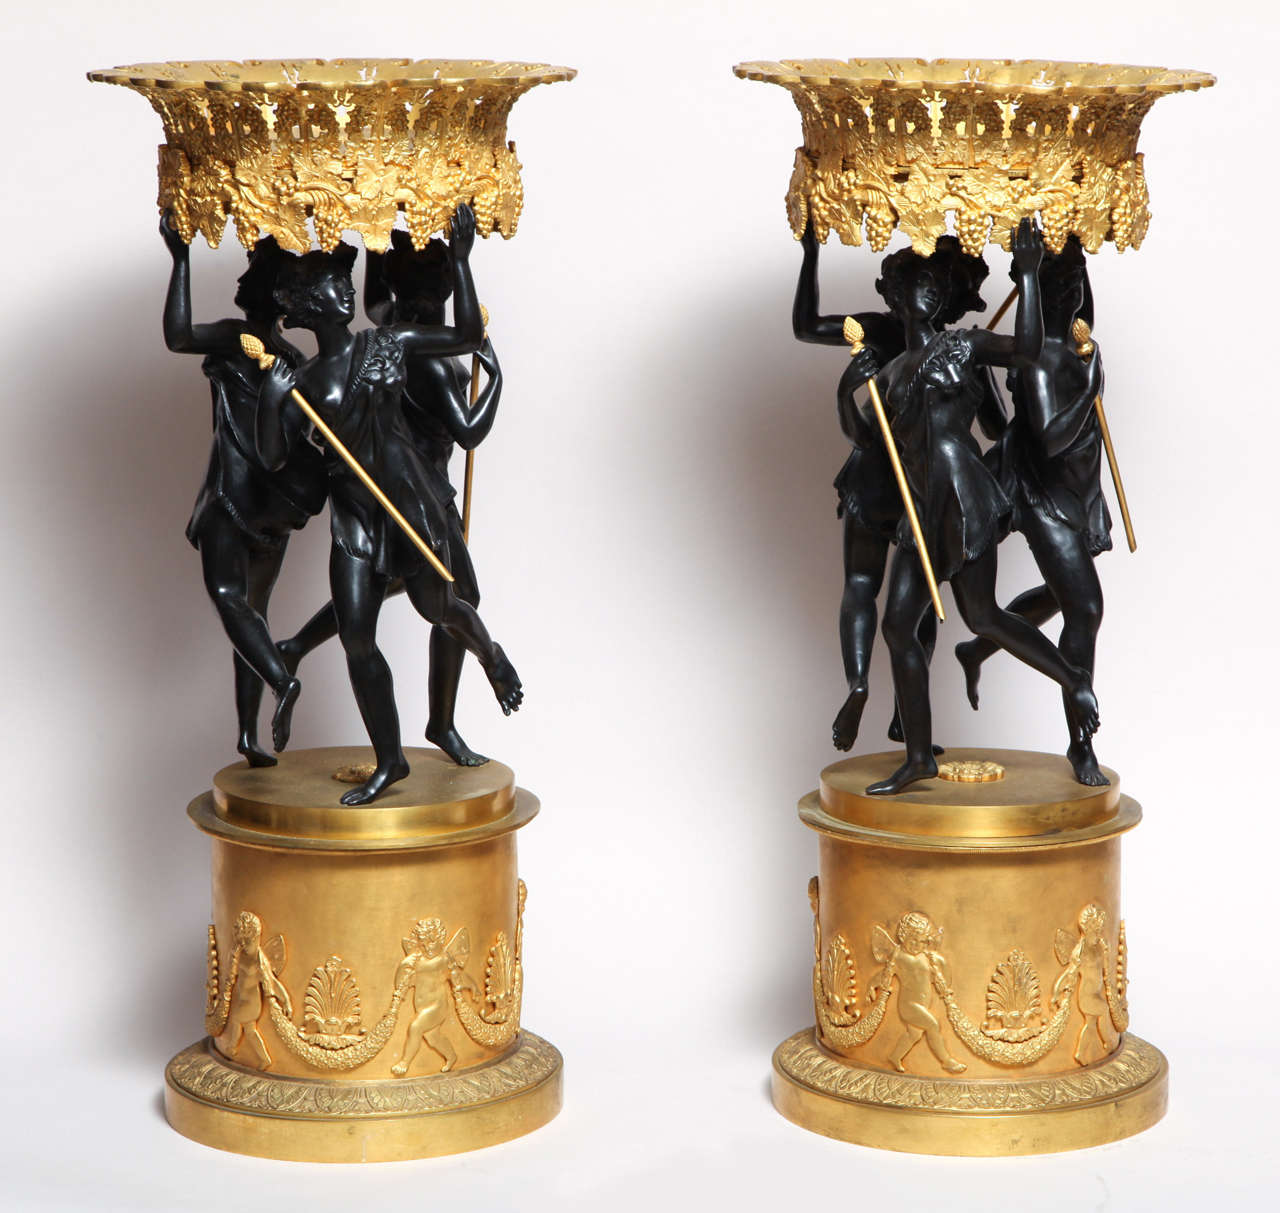 Pair of French neoclassical patinated and gilt bronze figural centerpieces.
Stock Number: DA6